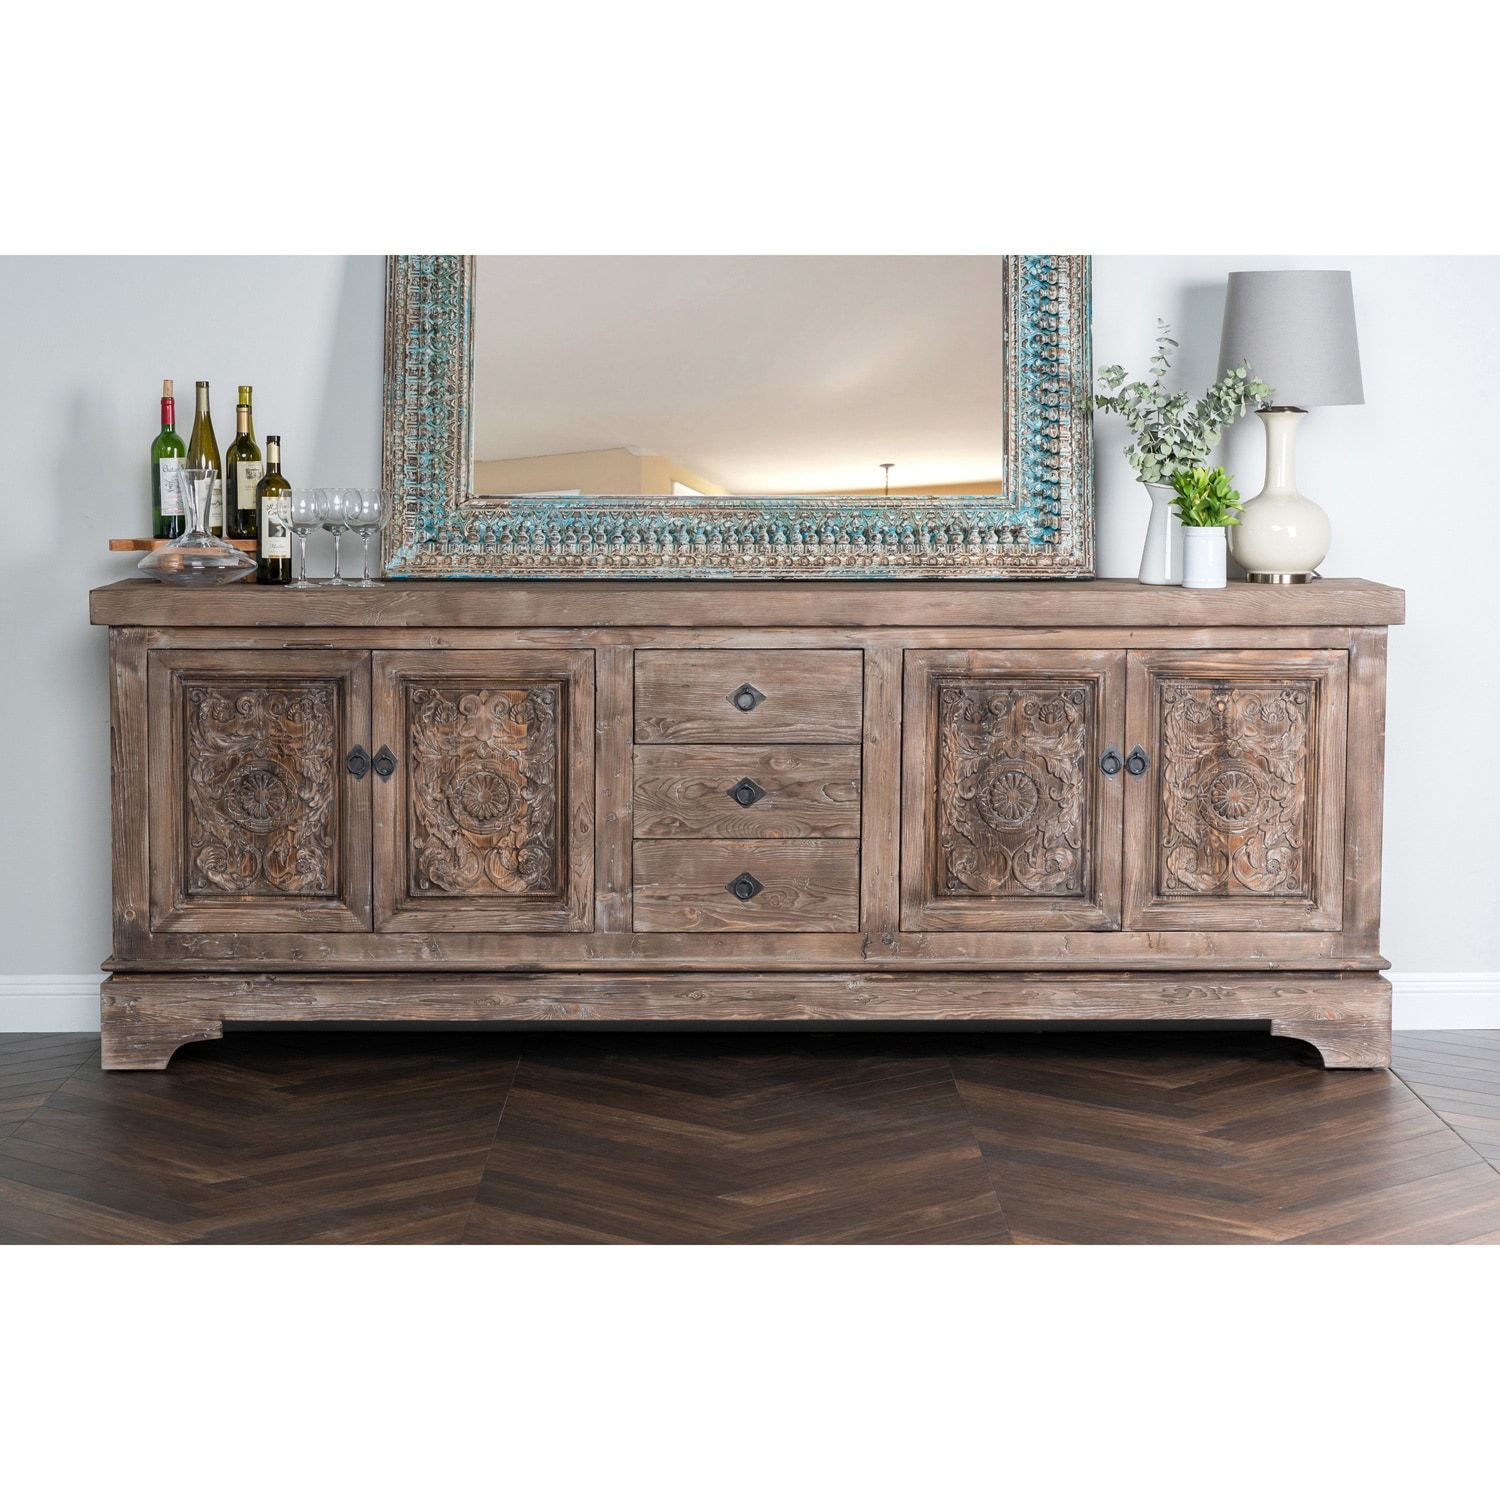 Allen Rustic Taupe Reclaimed Pine 106 Inch Sideboard Pertaining To 2017 Haroun Mocha Sideboards (View 2 of 20)